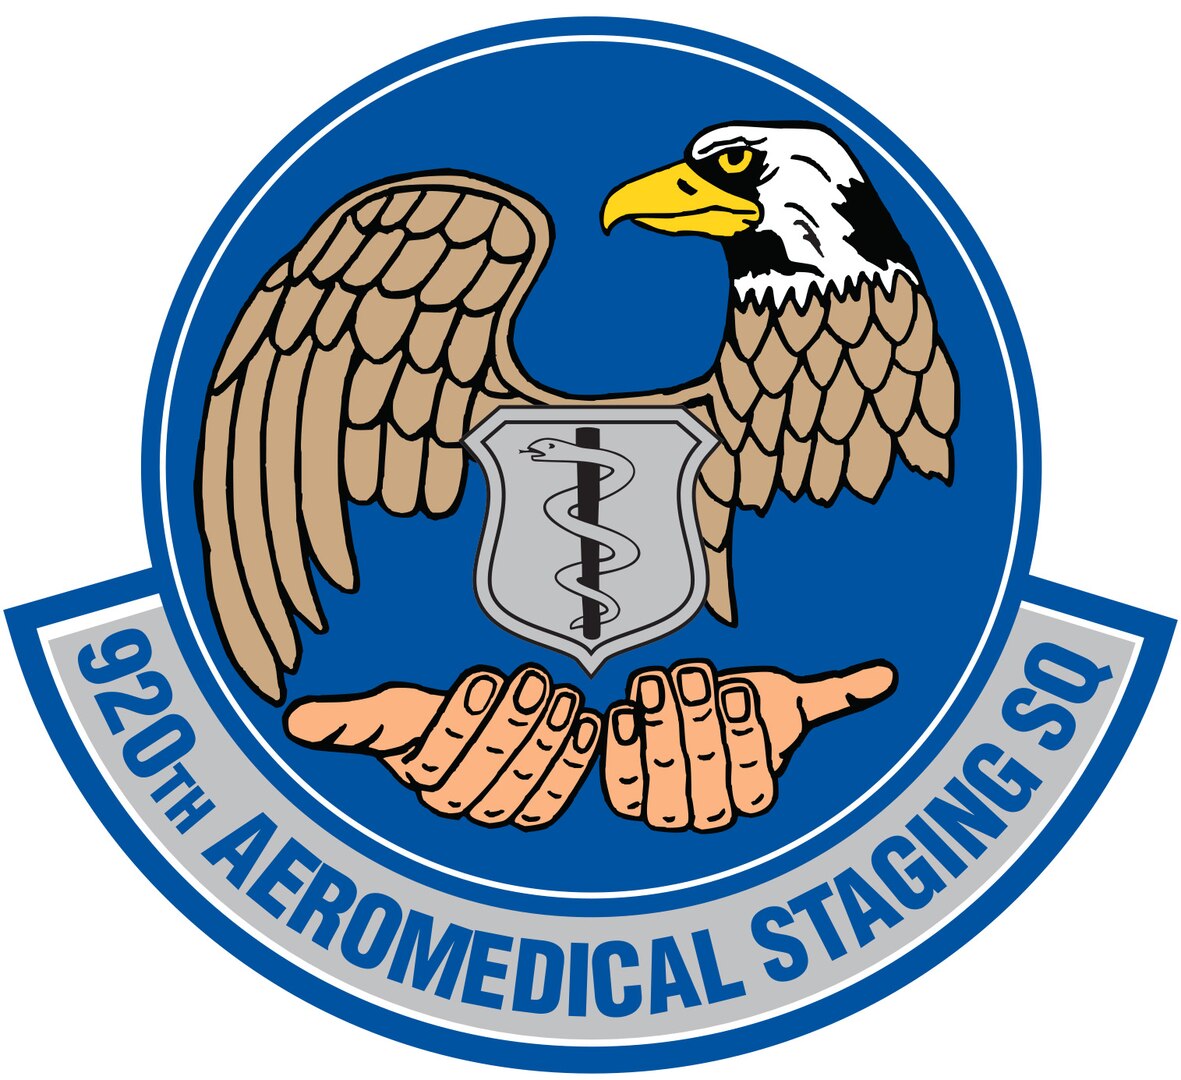 920th Aeromedical Staging Squadron